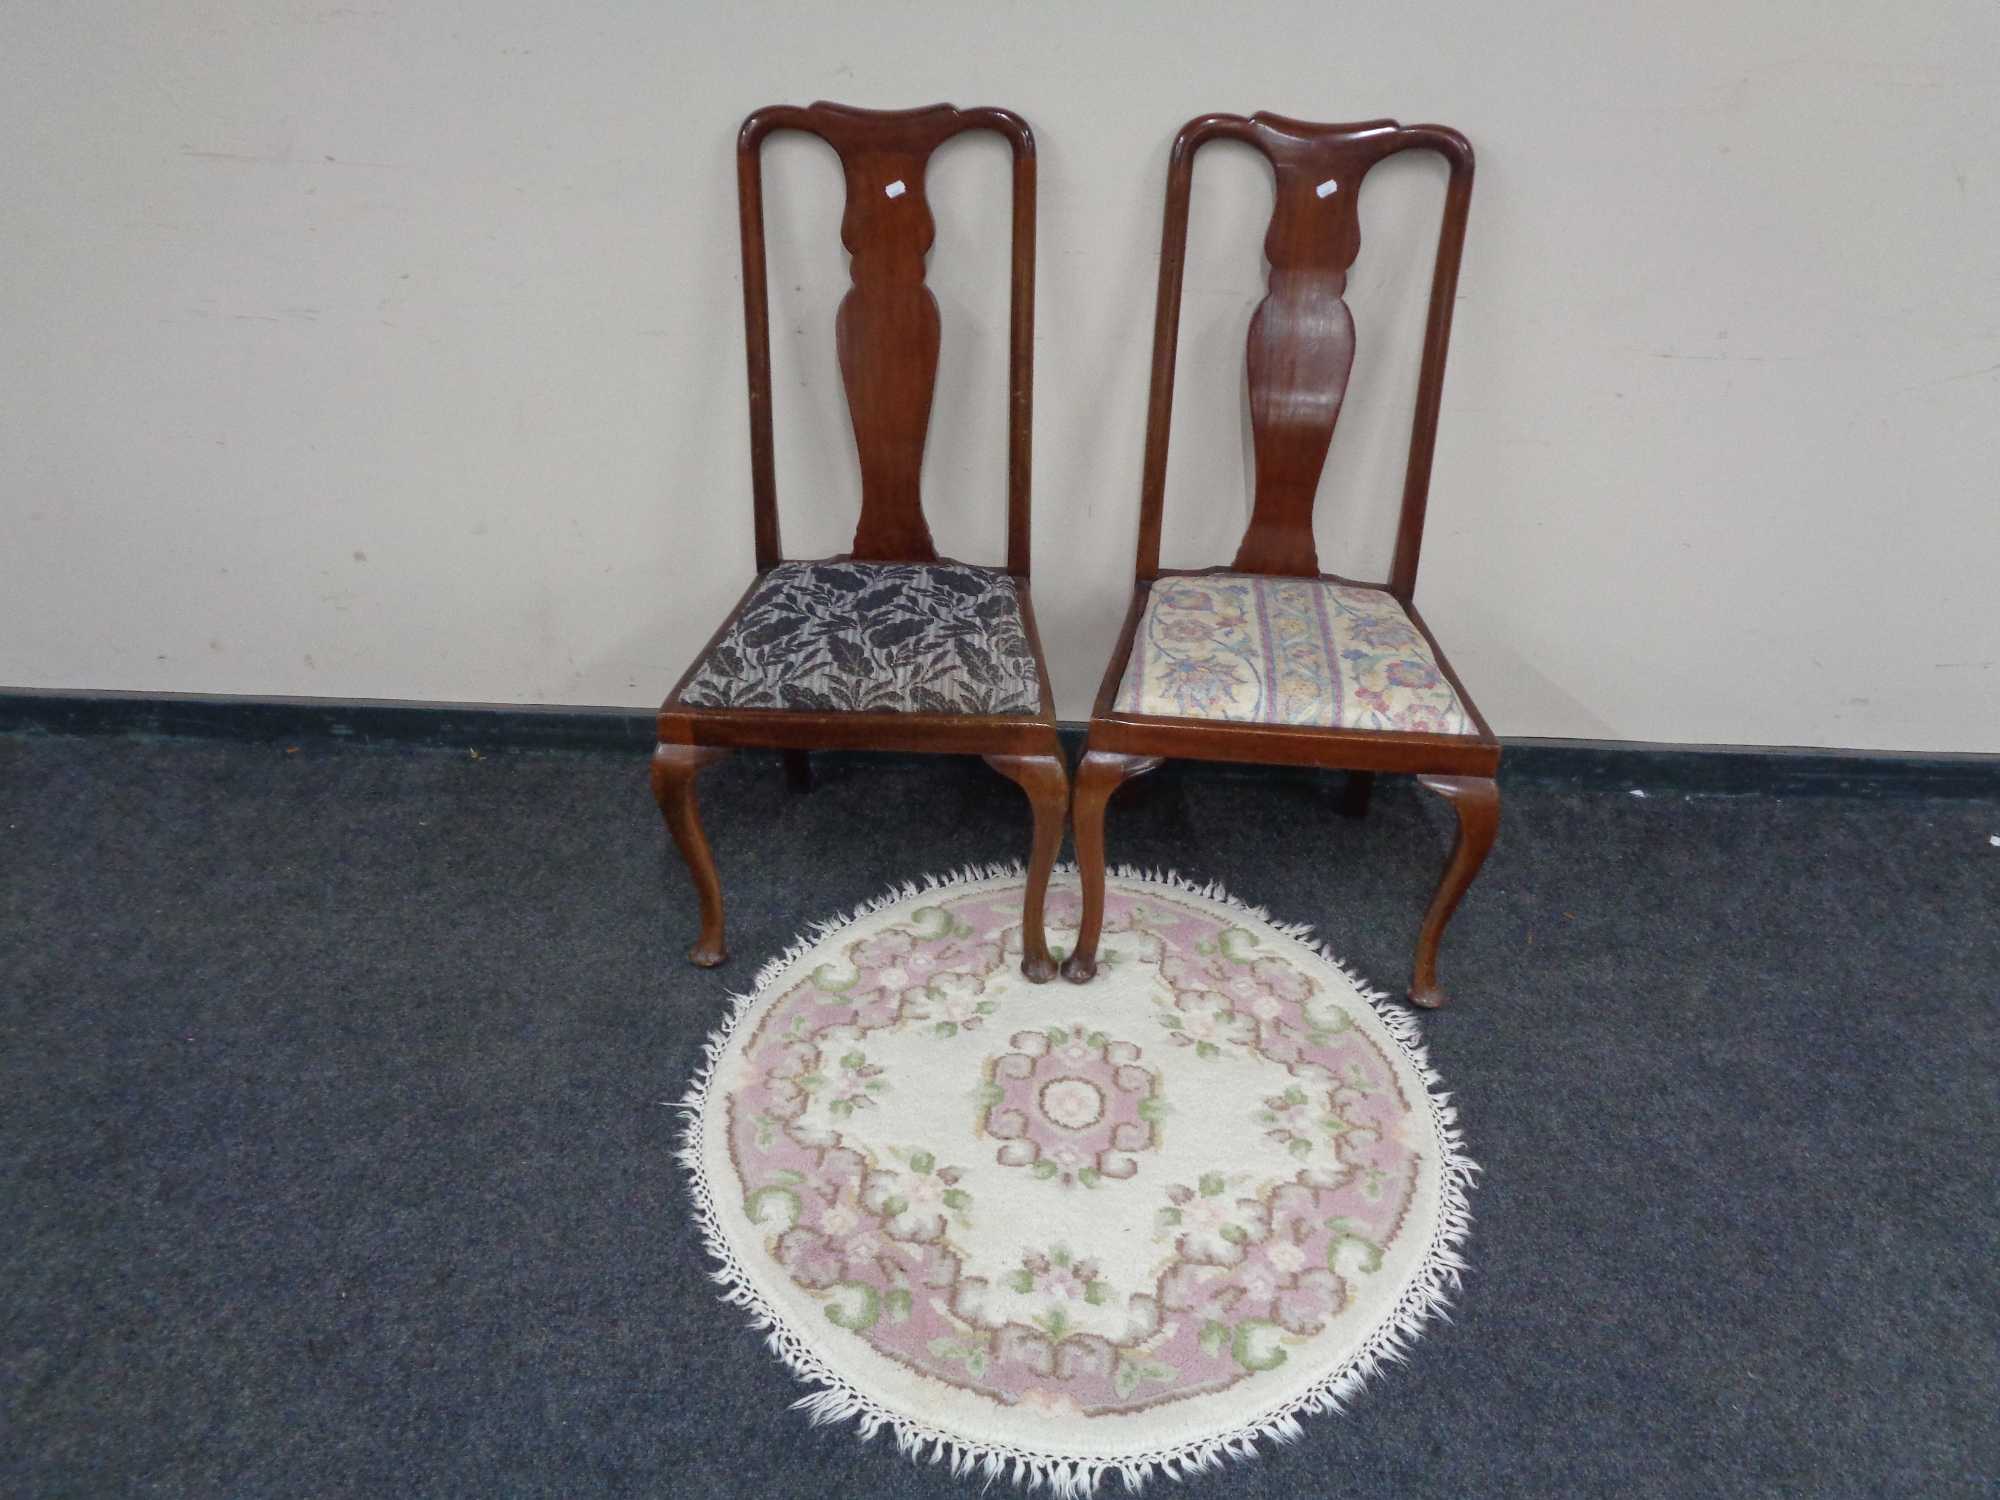 A pair of mahogany Queen Anne style dining chairs together with a circular fringed Indian rug.